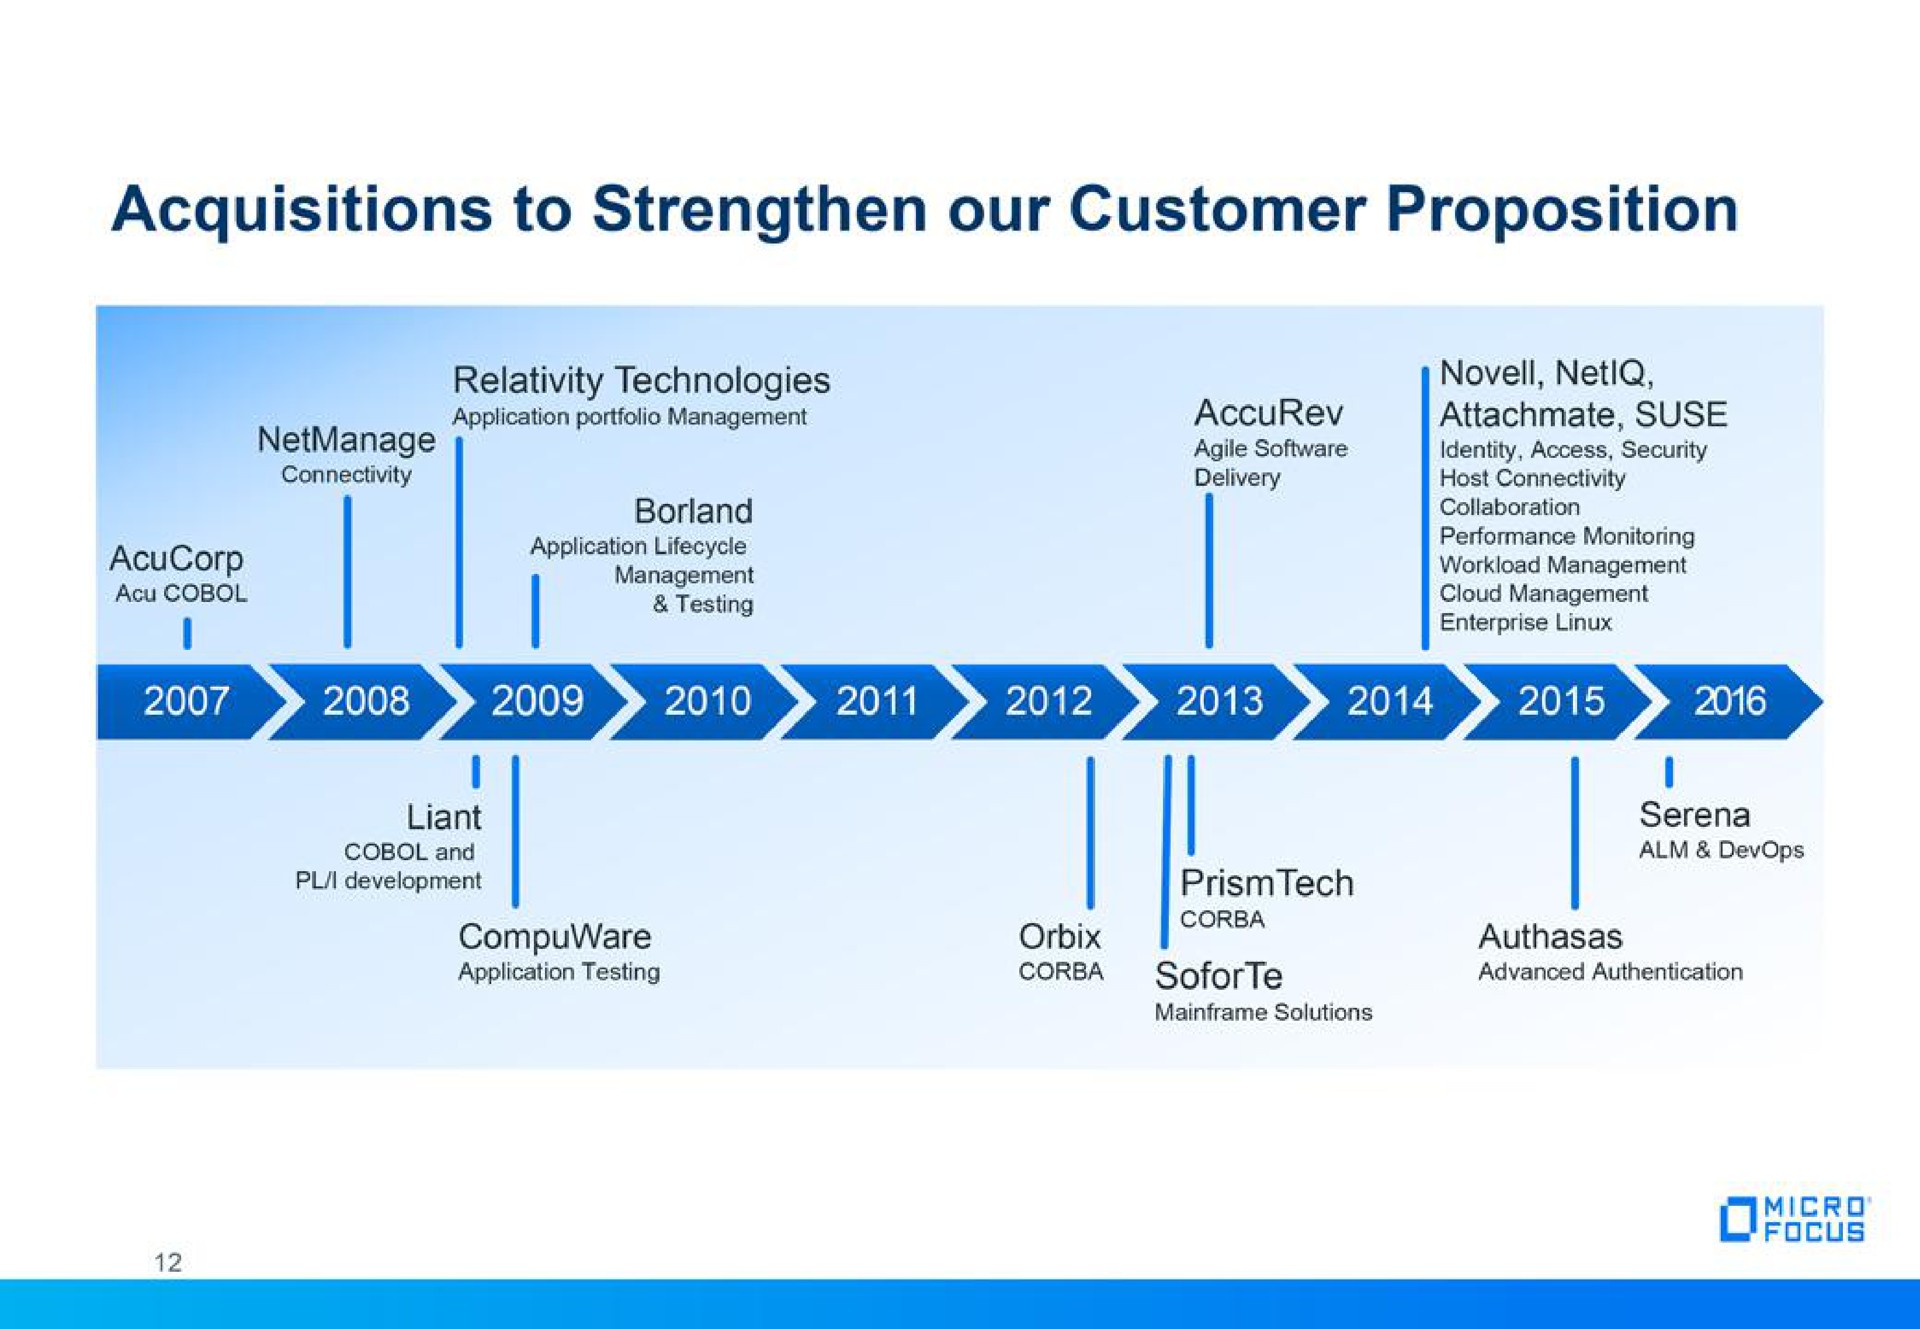 acquisitions to strengthen our customer proposition | Micro Focus